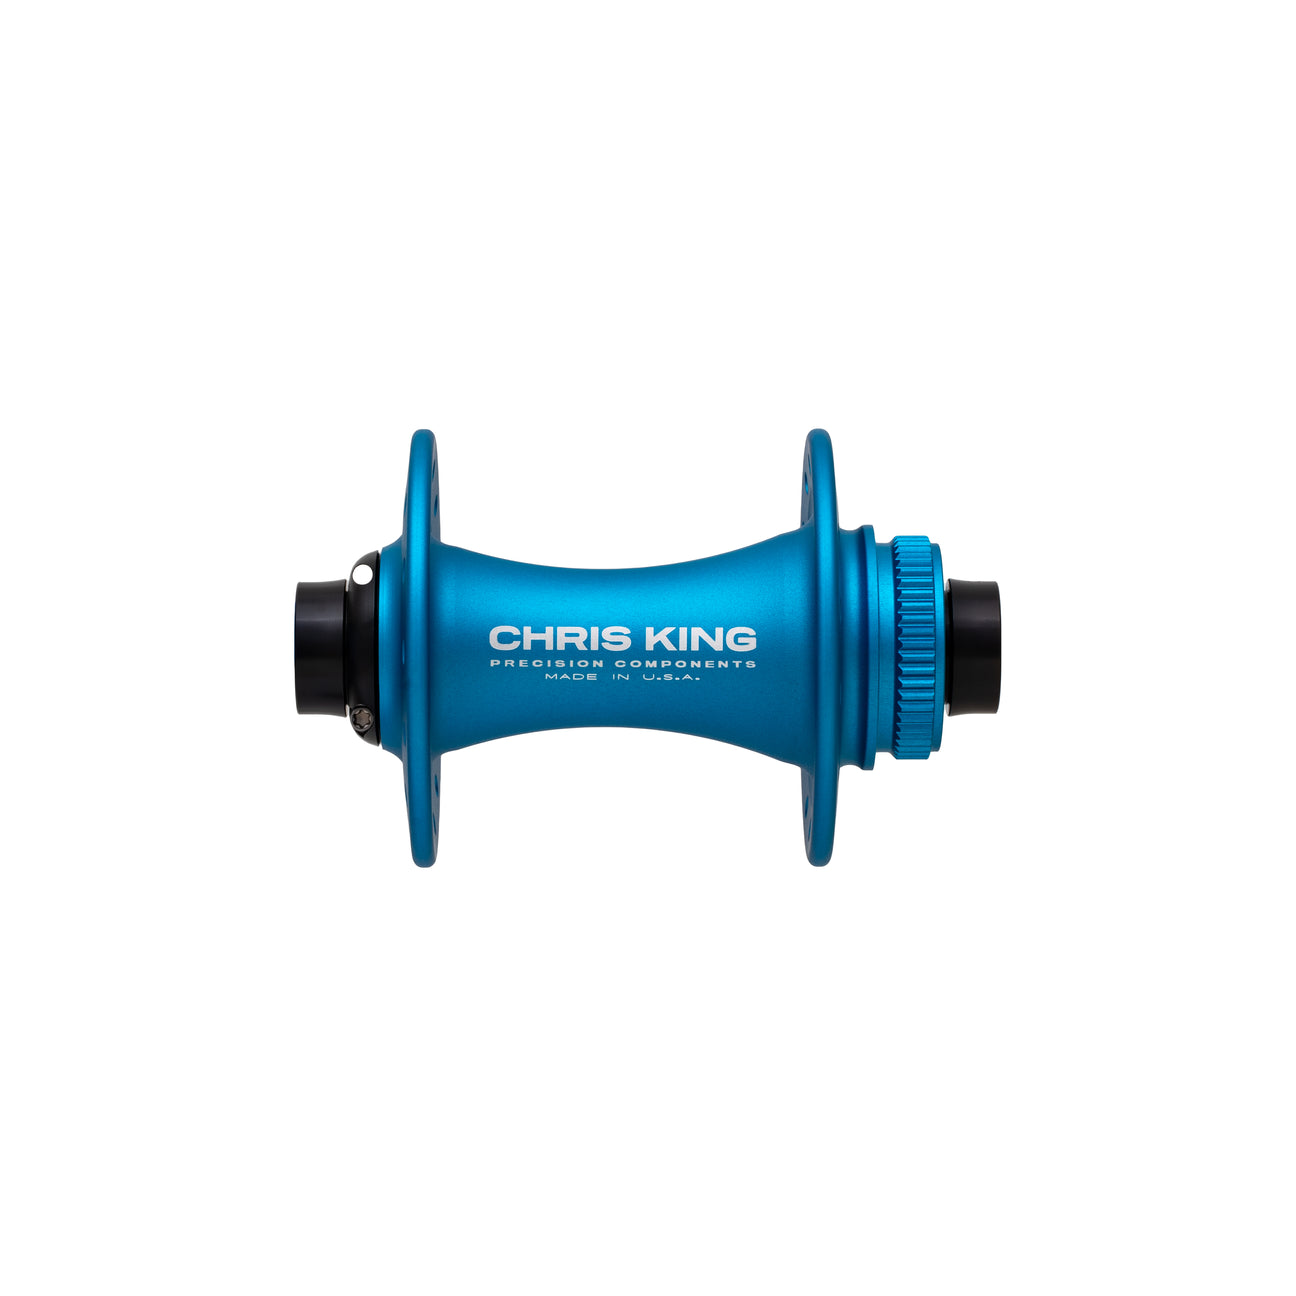 Chris King boost front hub in matte turquoise